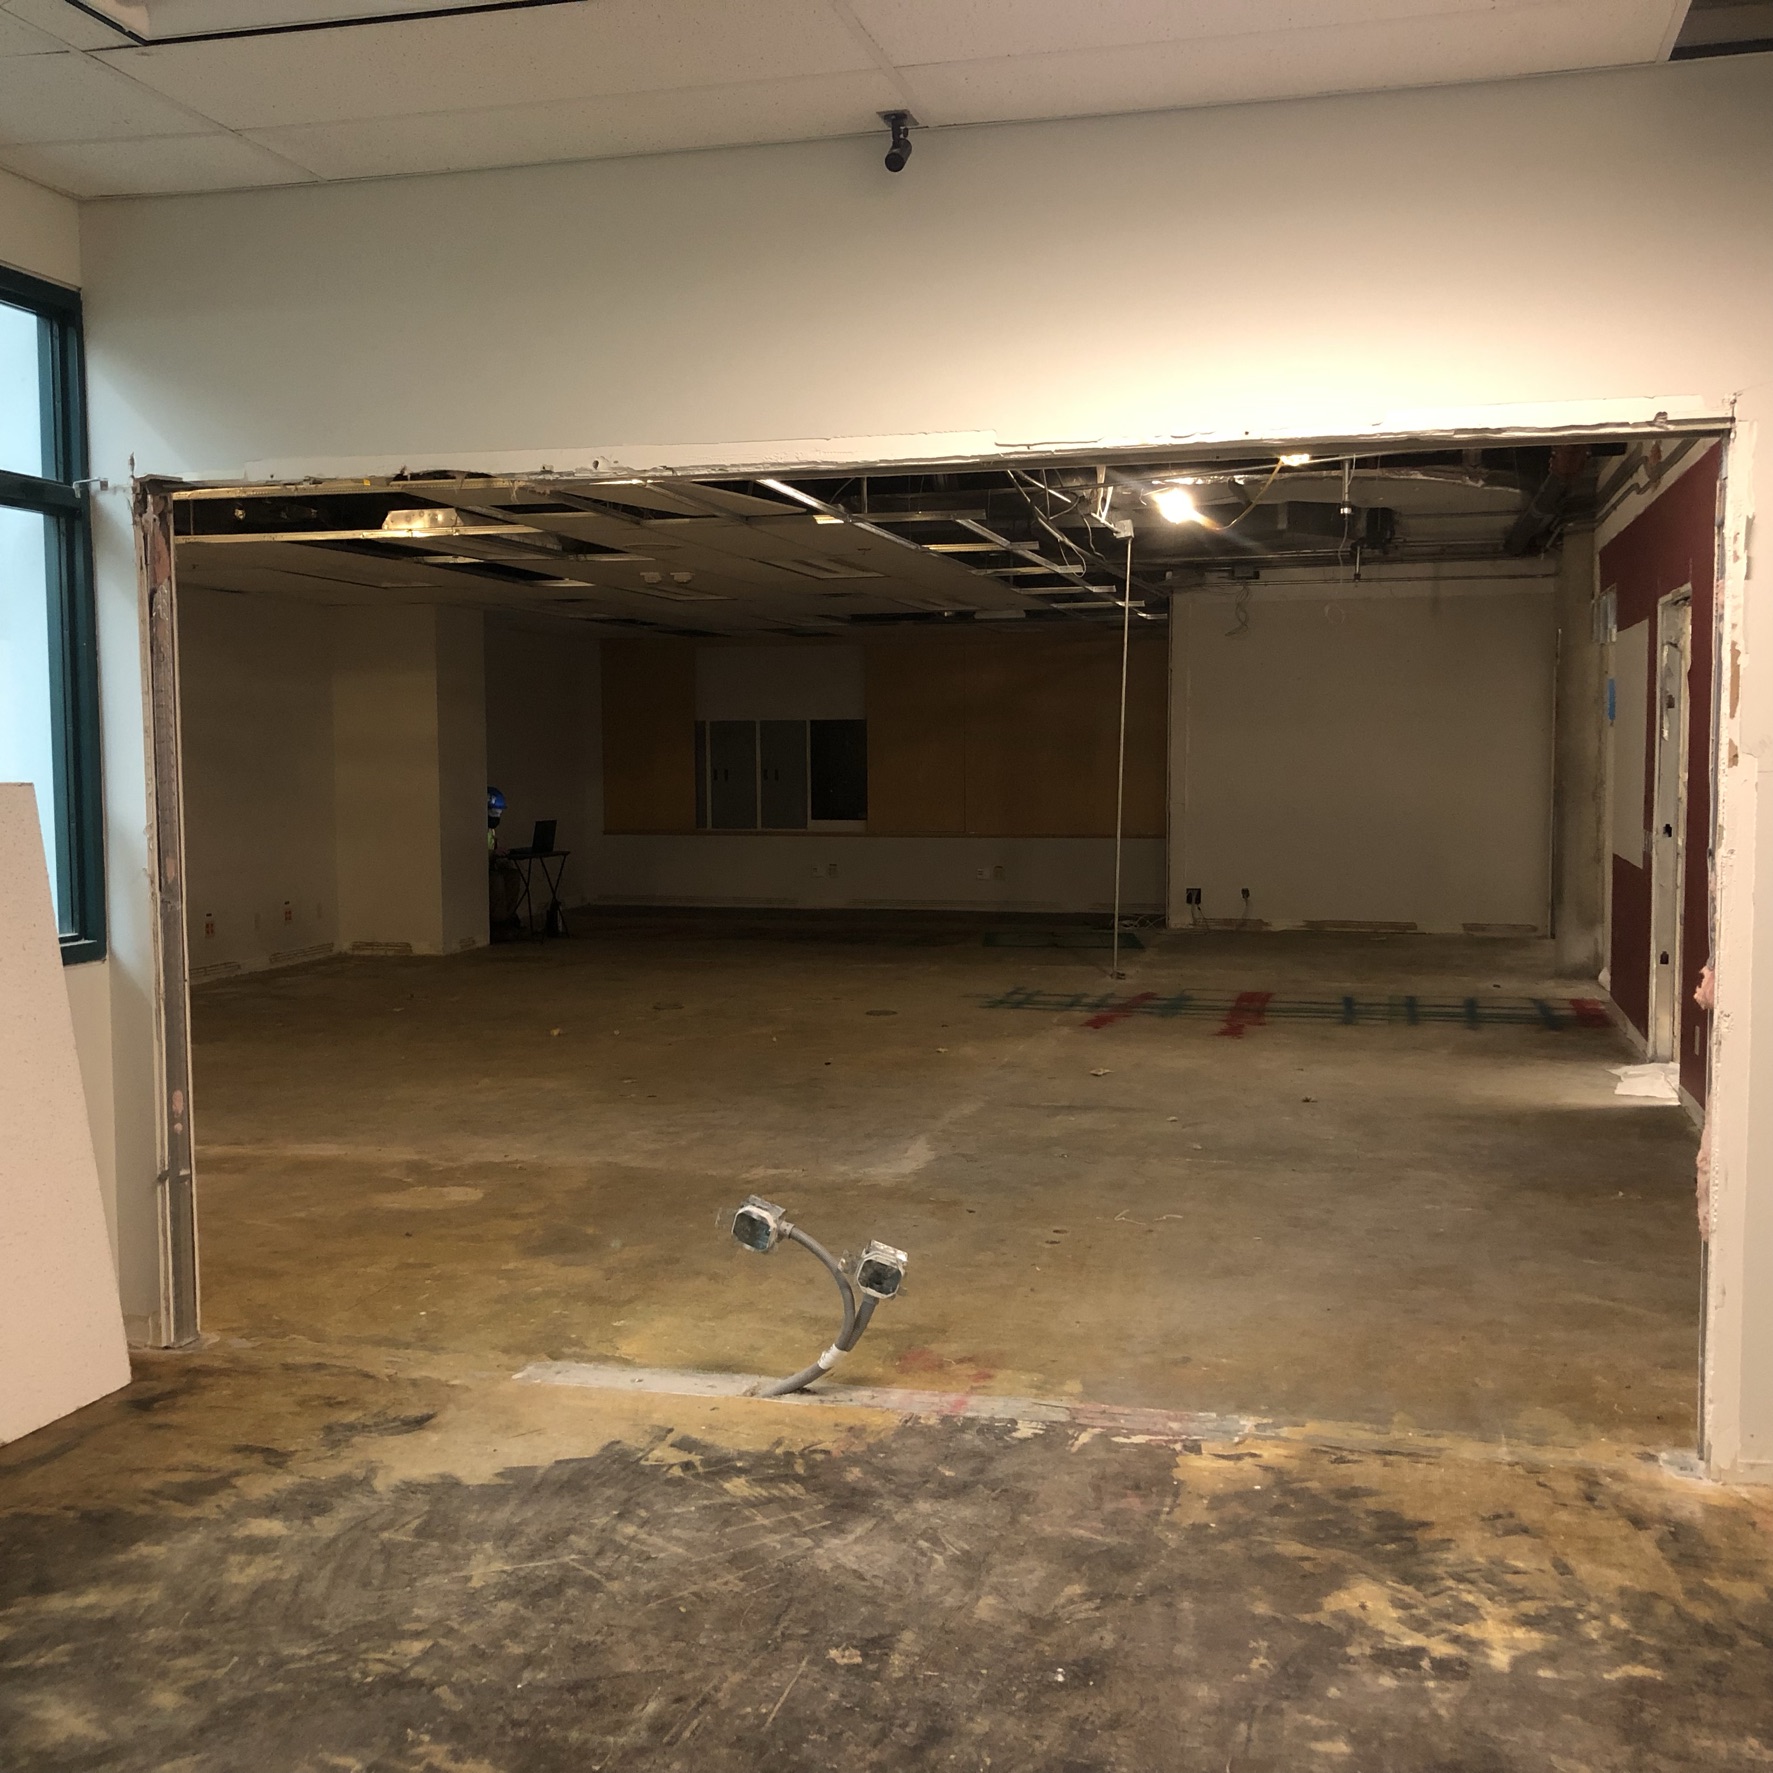 A photograph of a wall in the library that has been knocked out to reveal another room behind it which used to be the Exam Centre. This space will become the new Writing Centre and Makerspace. Flooring and ceiling covering have been removed exposing concrete and wiring.